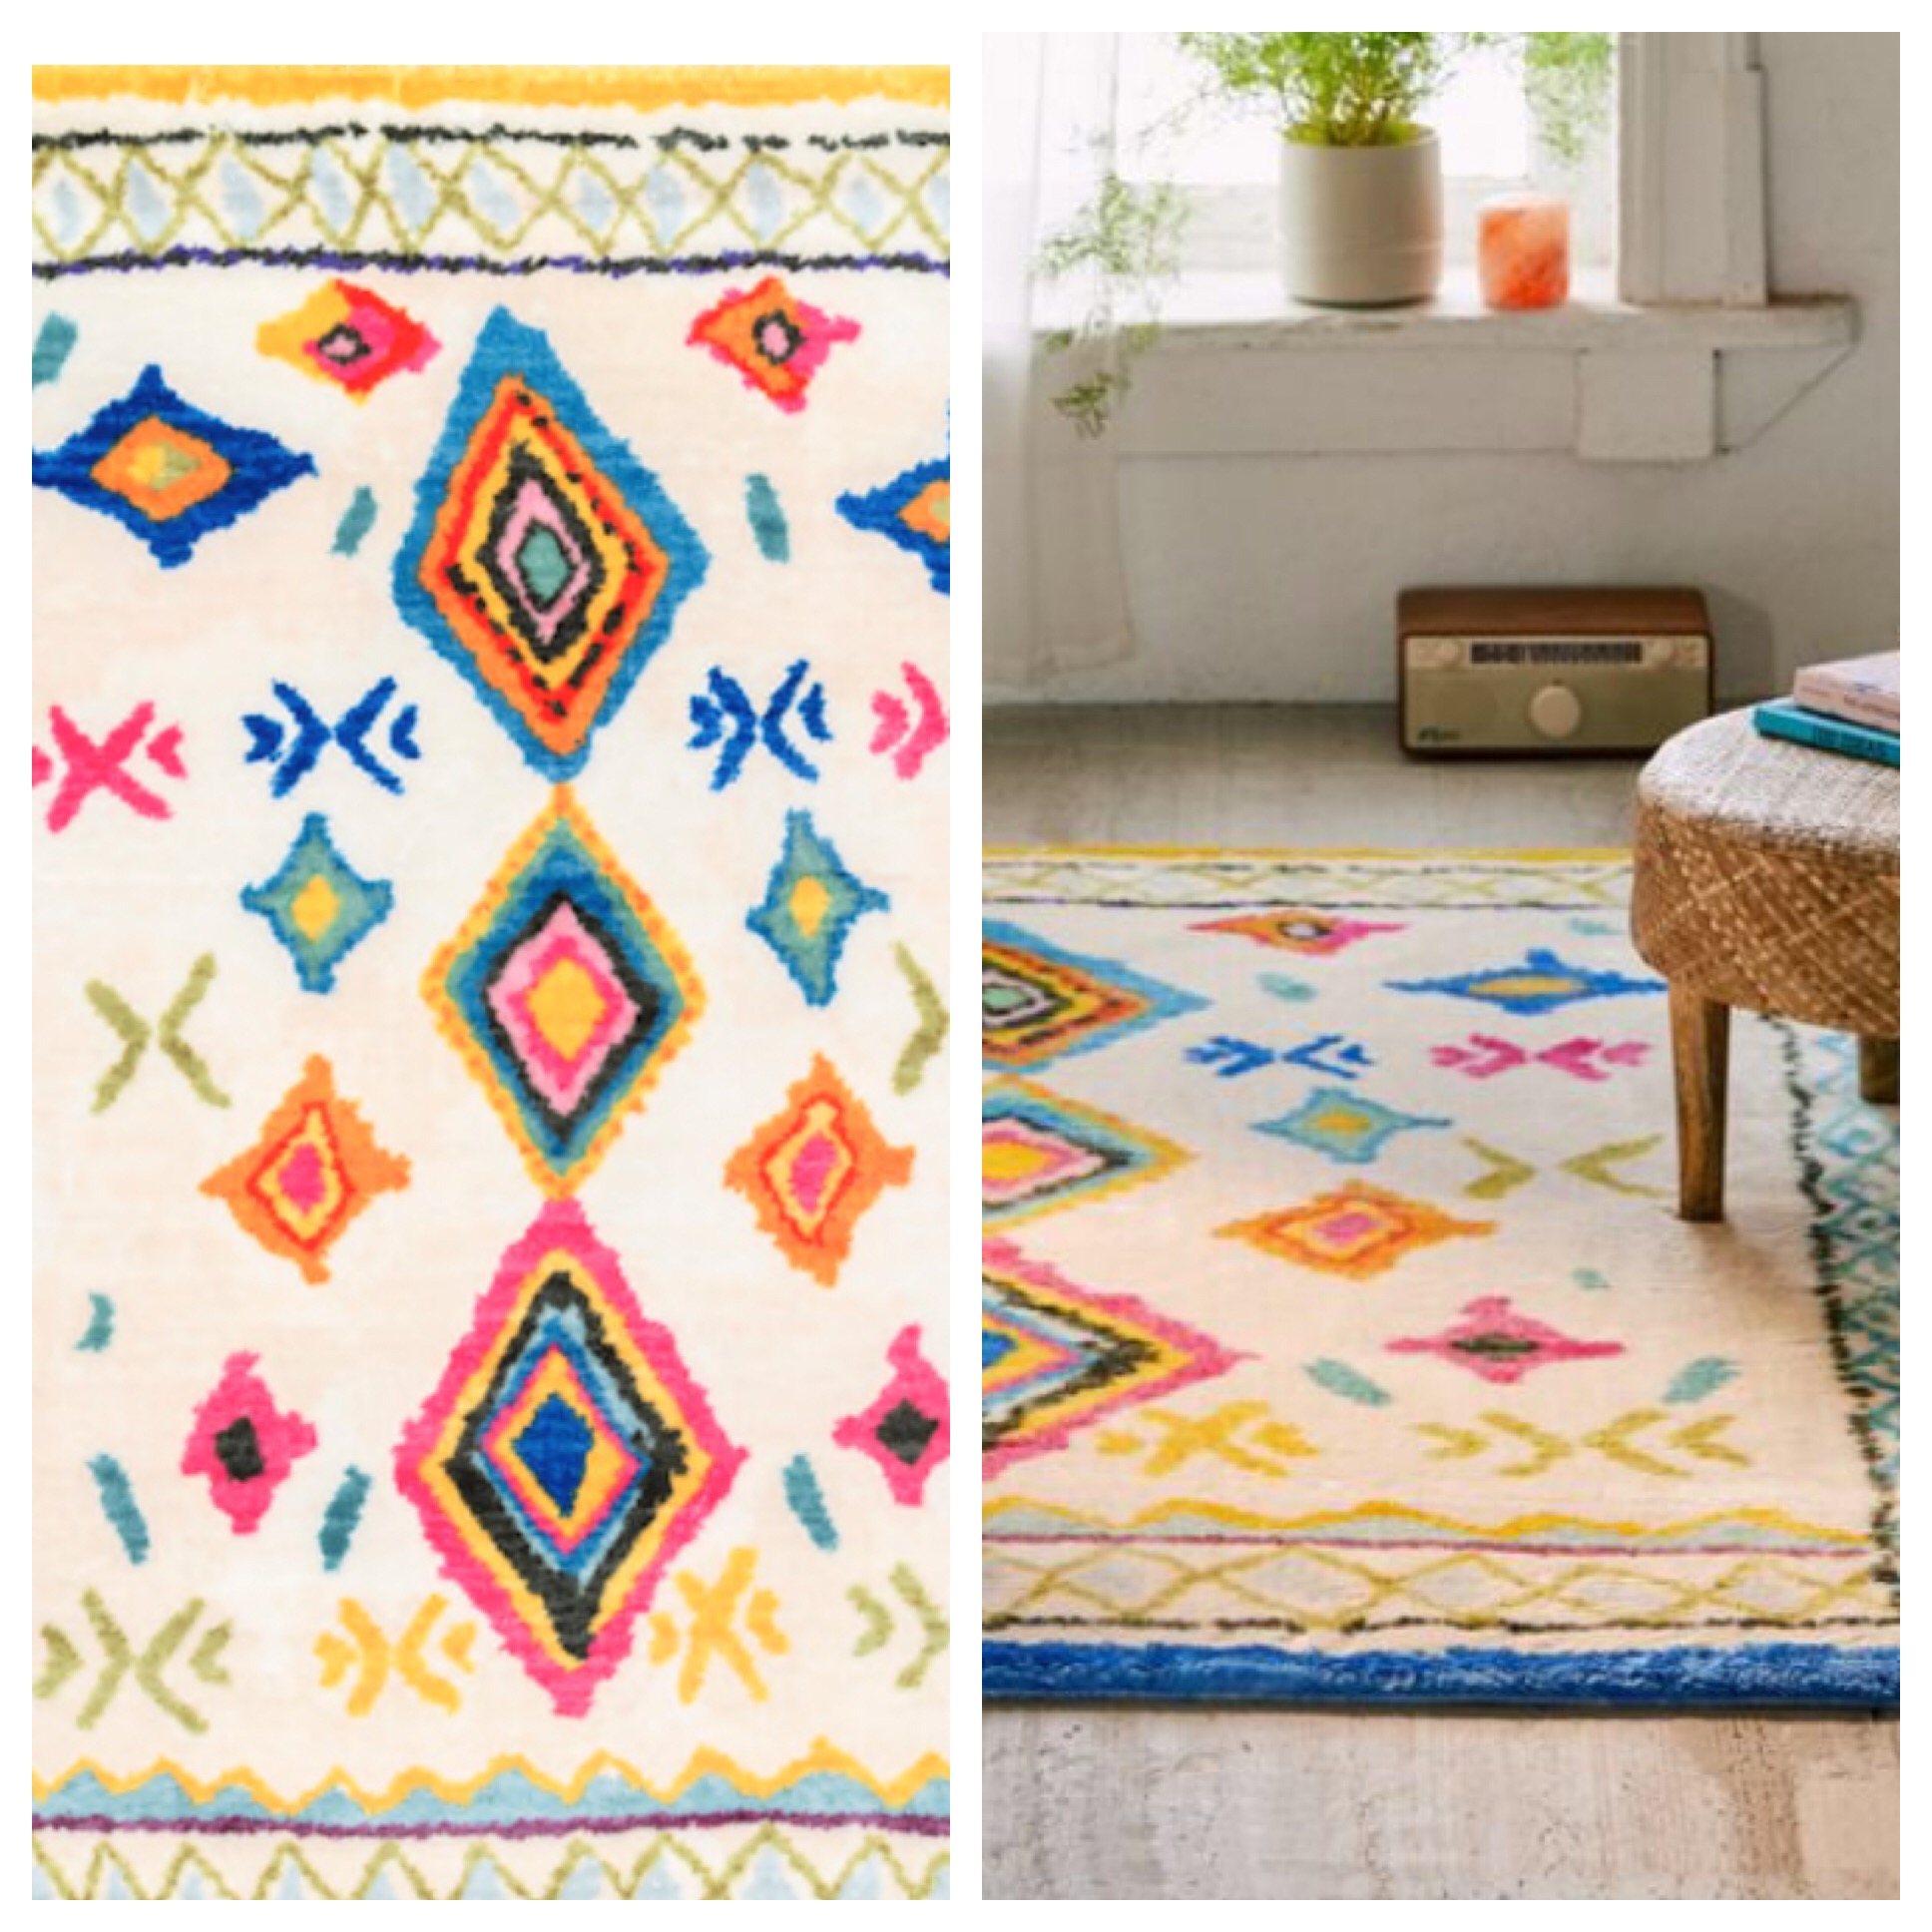 Urban Outfitter Rug Dupes Poppie Lady, Urban Outfitter Rugs